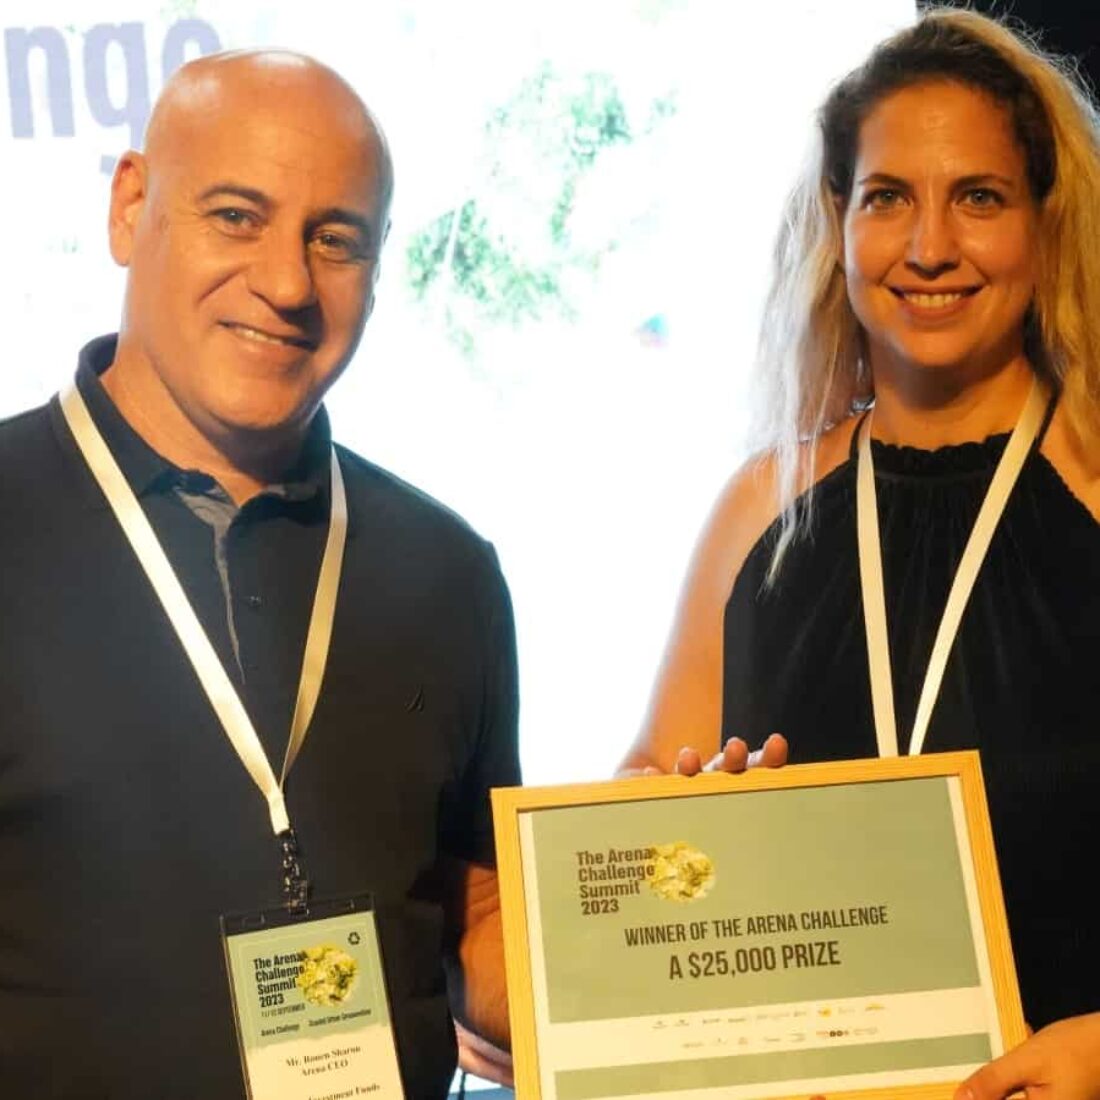 Ronen Sharon, head of commercial real estate at Reality Group, giving the Arena Challenge startup competition award certificate to Moran Kirshner Goldberg, CEO of Zohar Cleantech. Photo courtesy of Reality Group